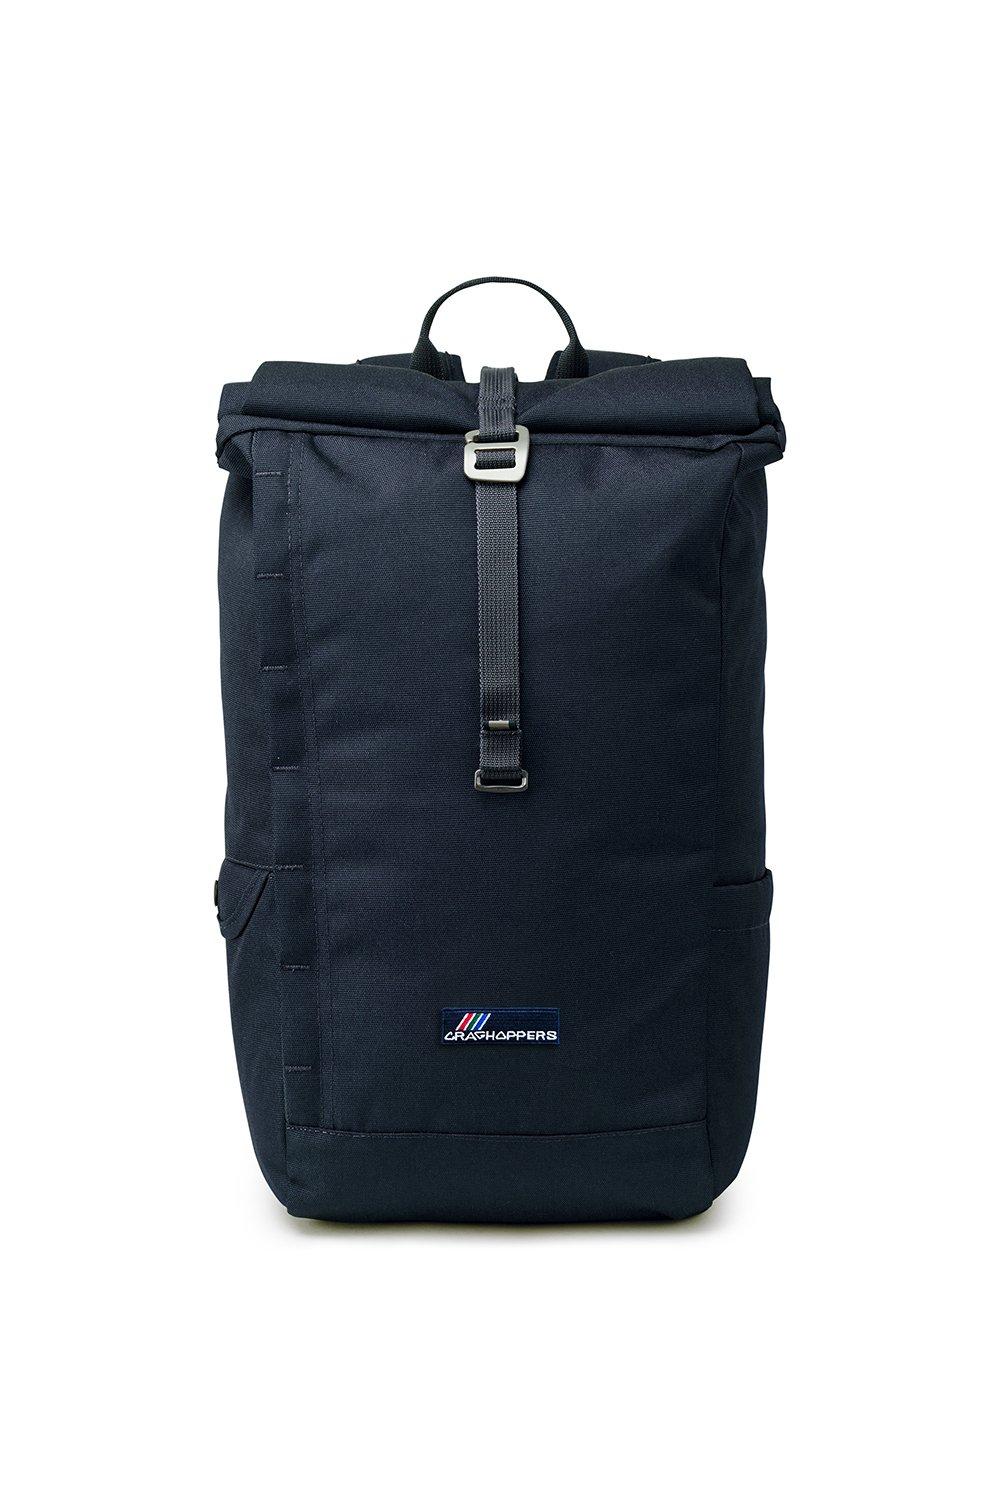 '20L Kiwi Classic' Recycled EcoShield Rolltop Backpack